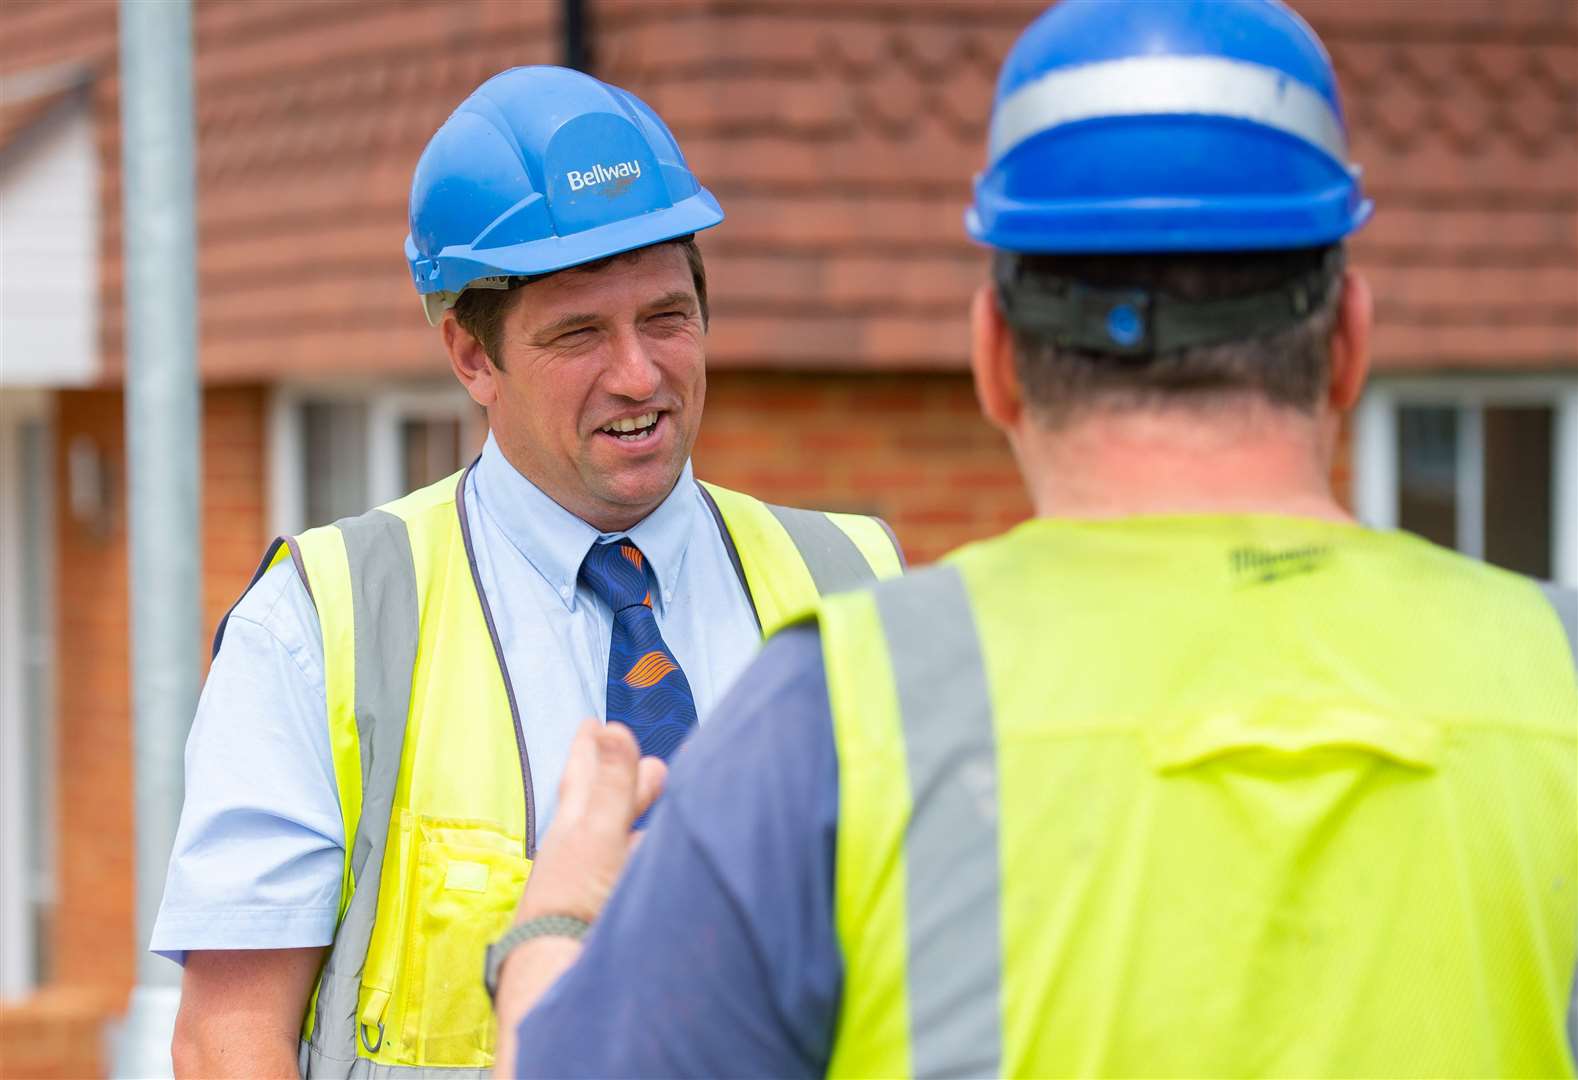 The 43-year-old site manager has now won an award. Picture: Bellway Homes